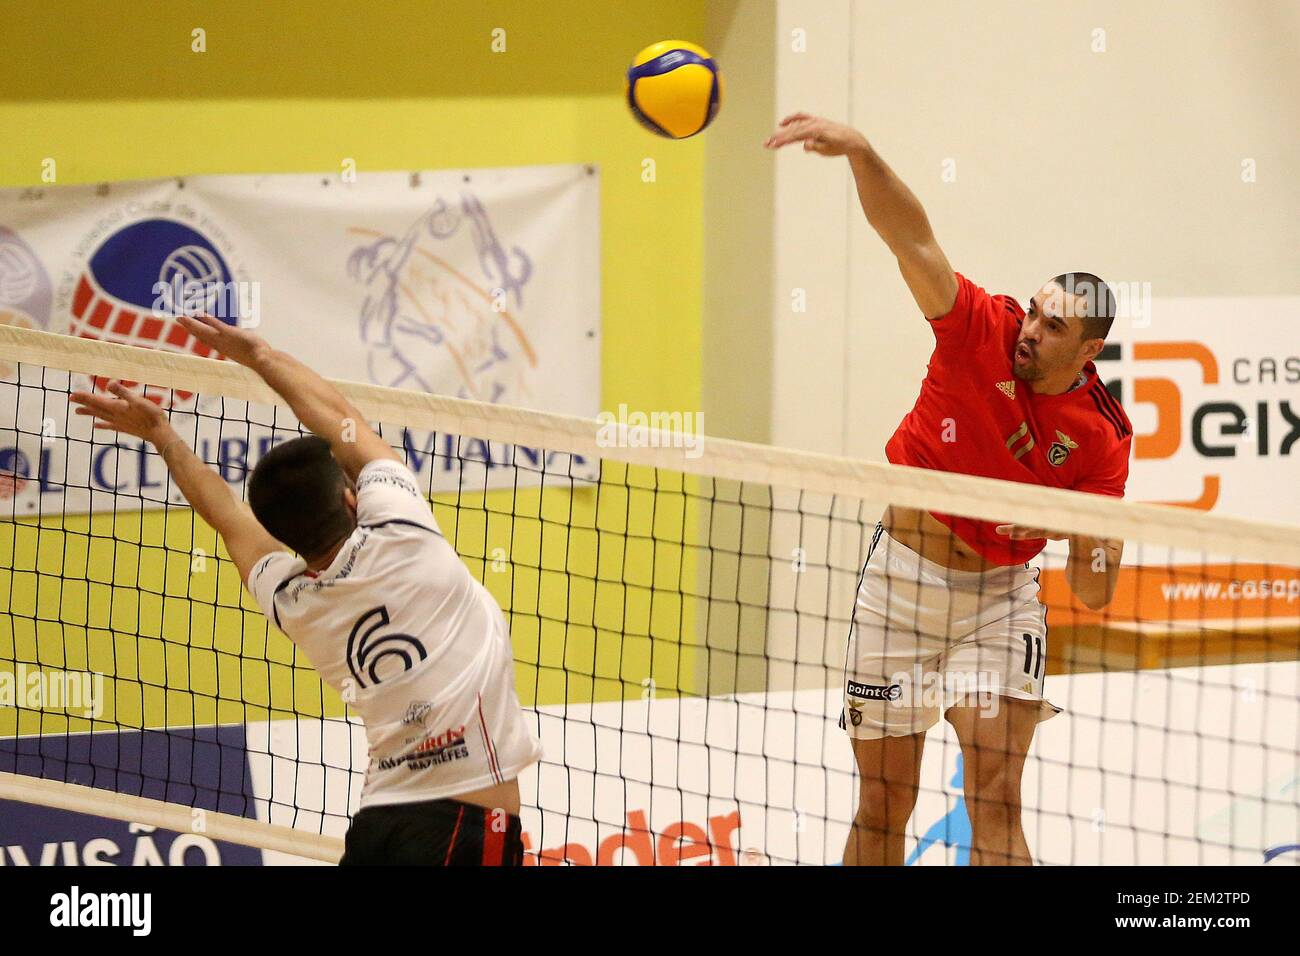 Viana do Castelo, 11/30/2020 - The Voleibol Clube Viana played this  afternoon against Sport Lisboa e Benfica in the 10th round of the National  Volleyball Championship 2020/2021. The game was played at